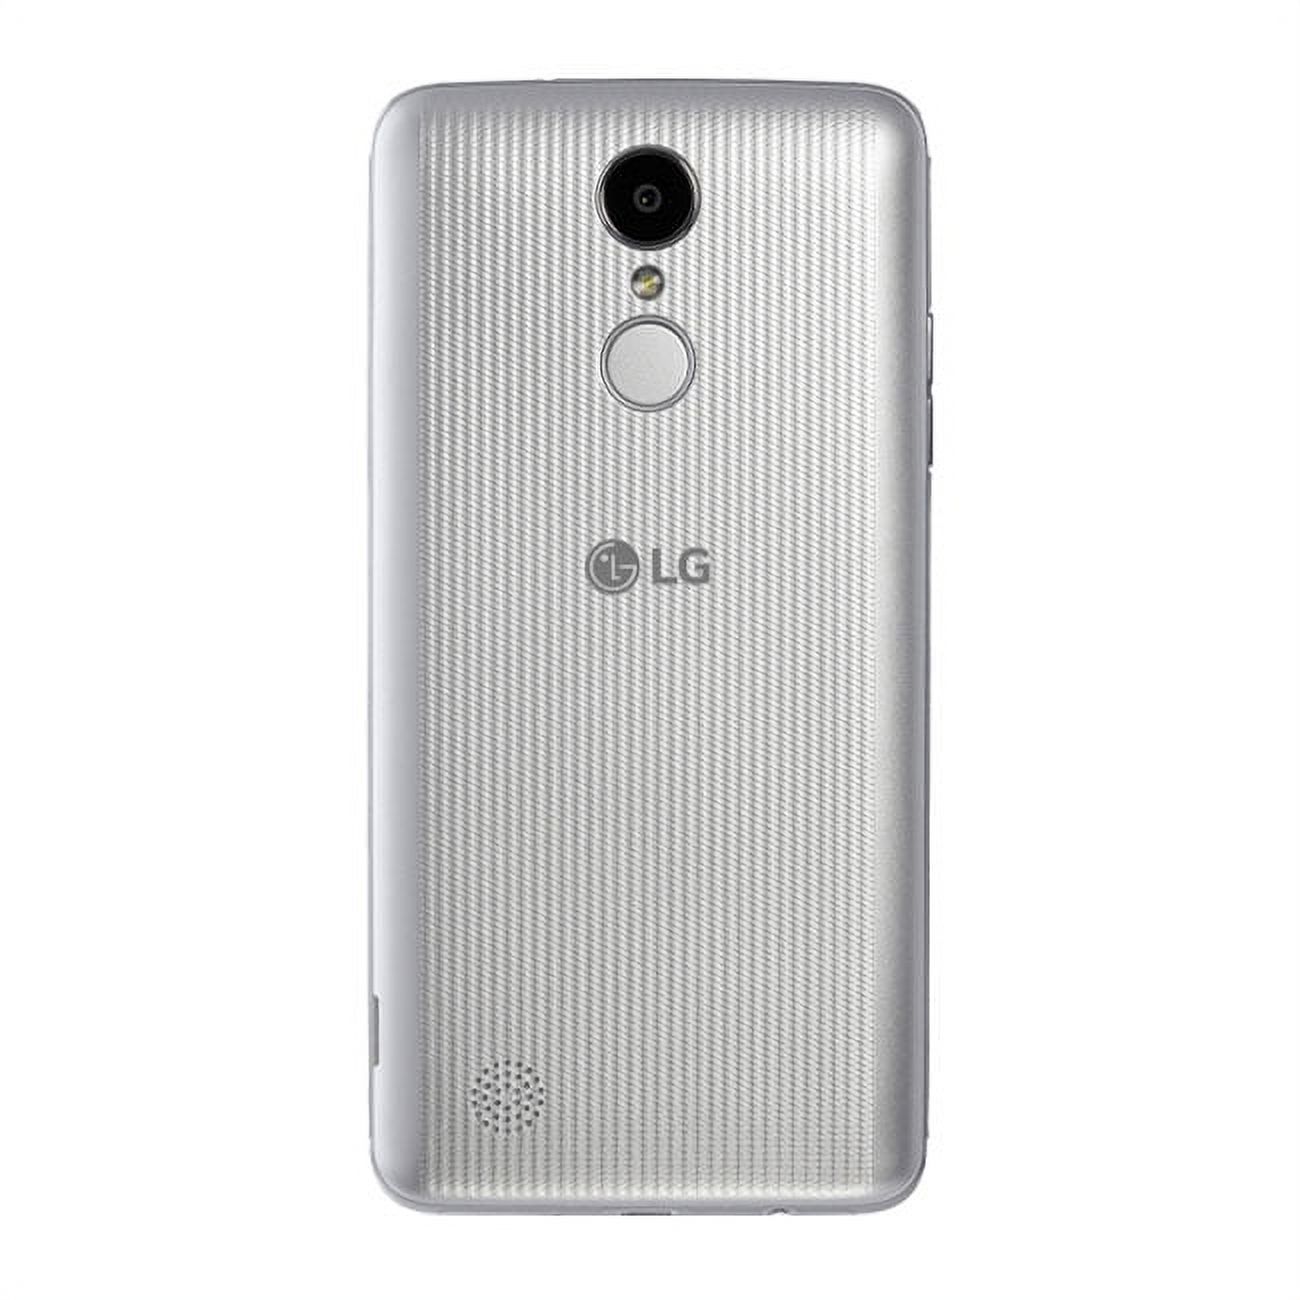 Pre-Owned LG Aristo M210 GSM (T-Mobile Unlocked) 16GB 5.0" Android Smartphone, Silver (Good) - image 3 of 5